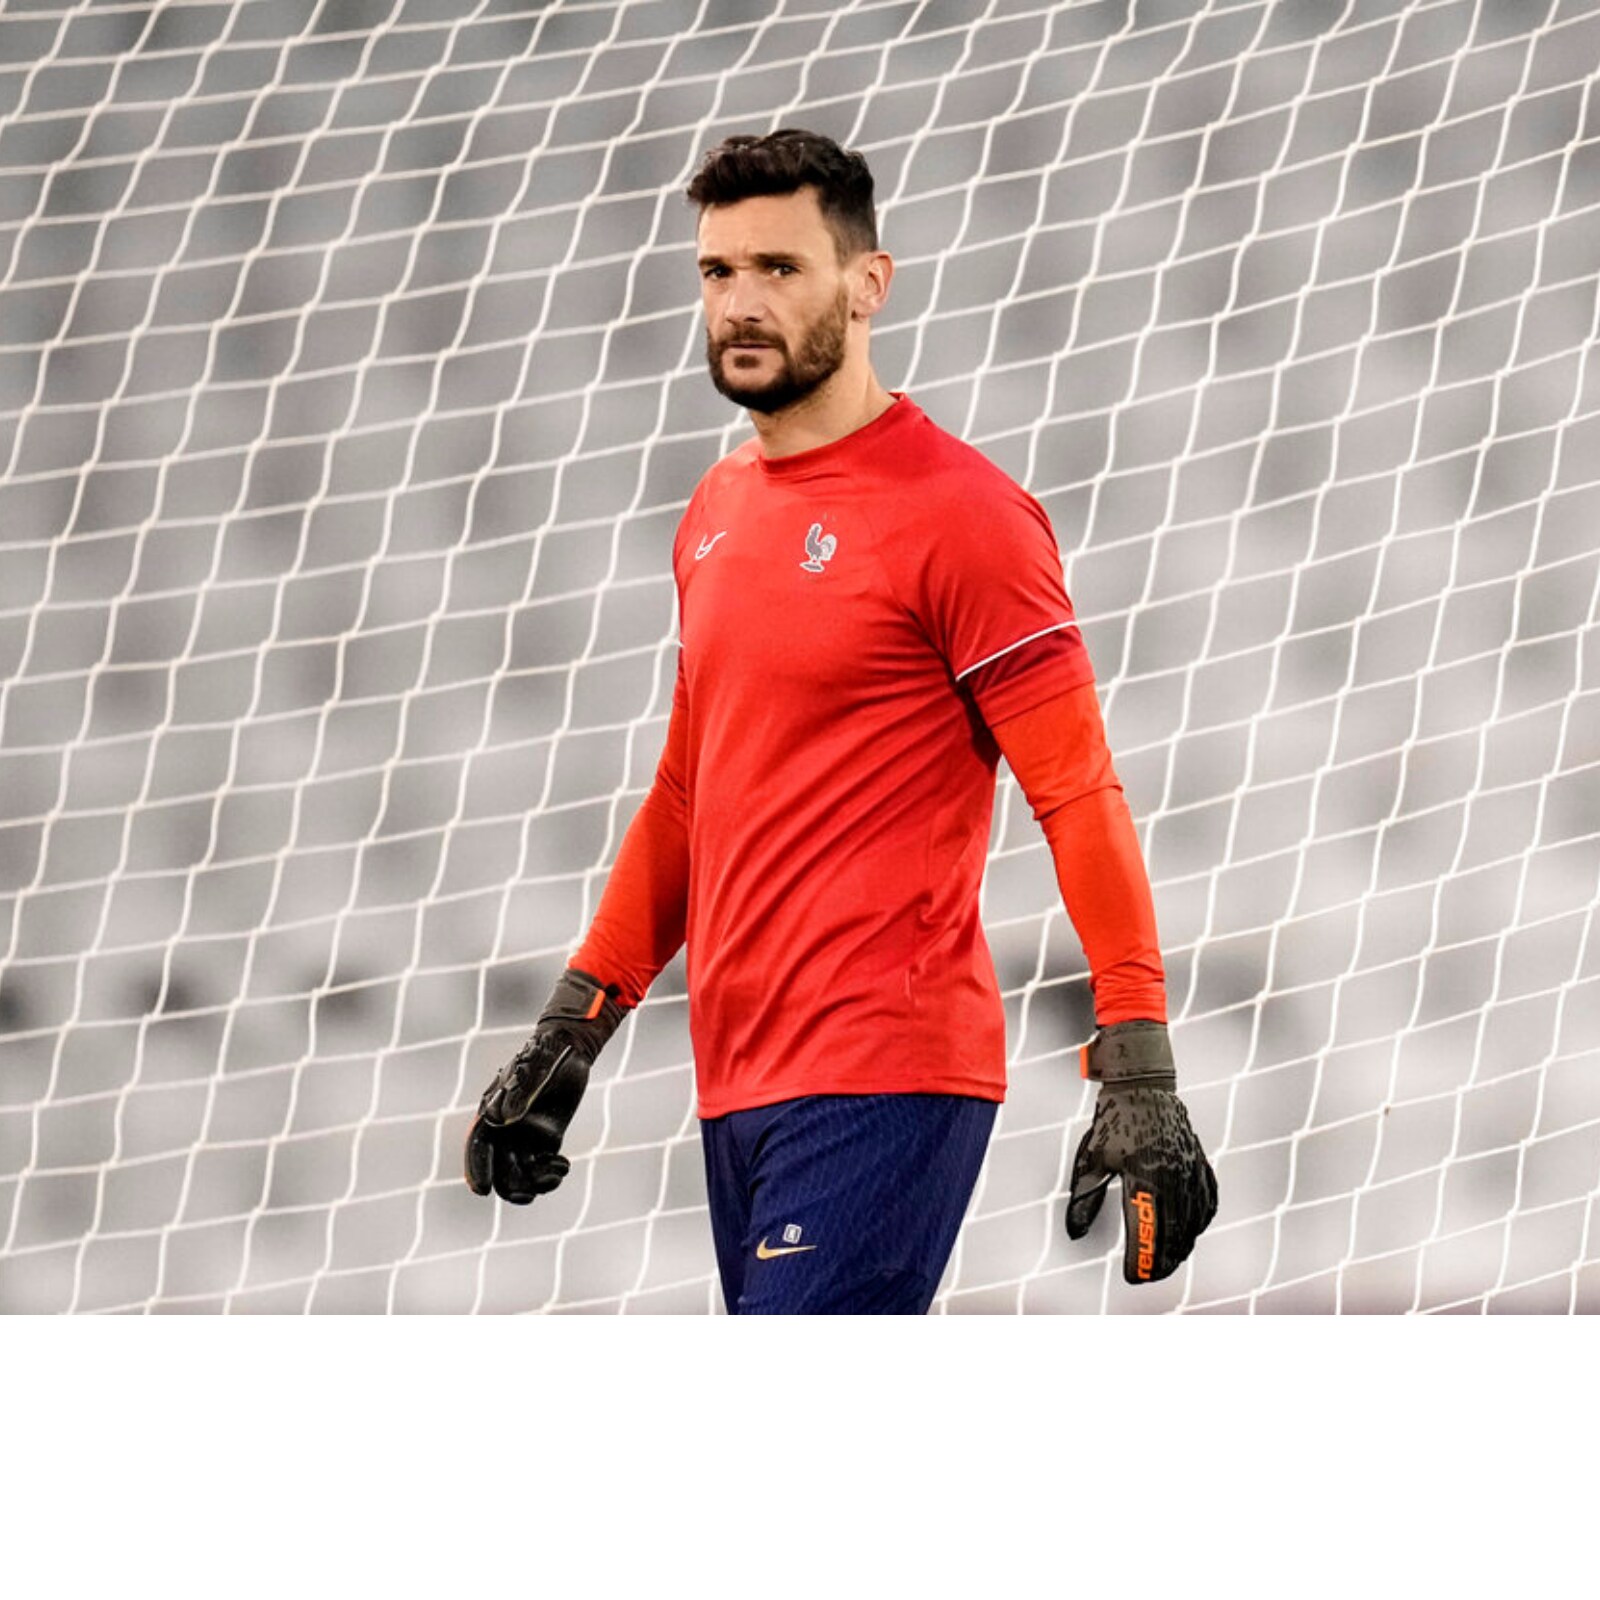 Hugo Lloris. Goalkeeper. Jersey No. 1 of the French Team…